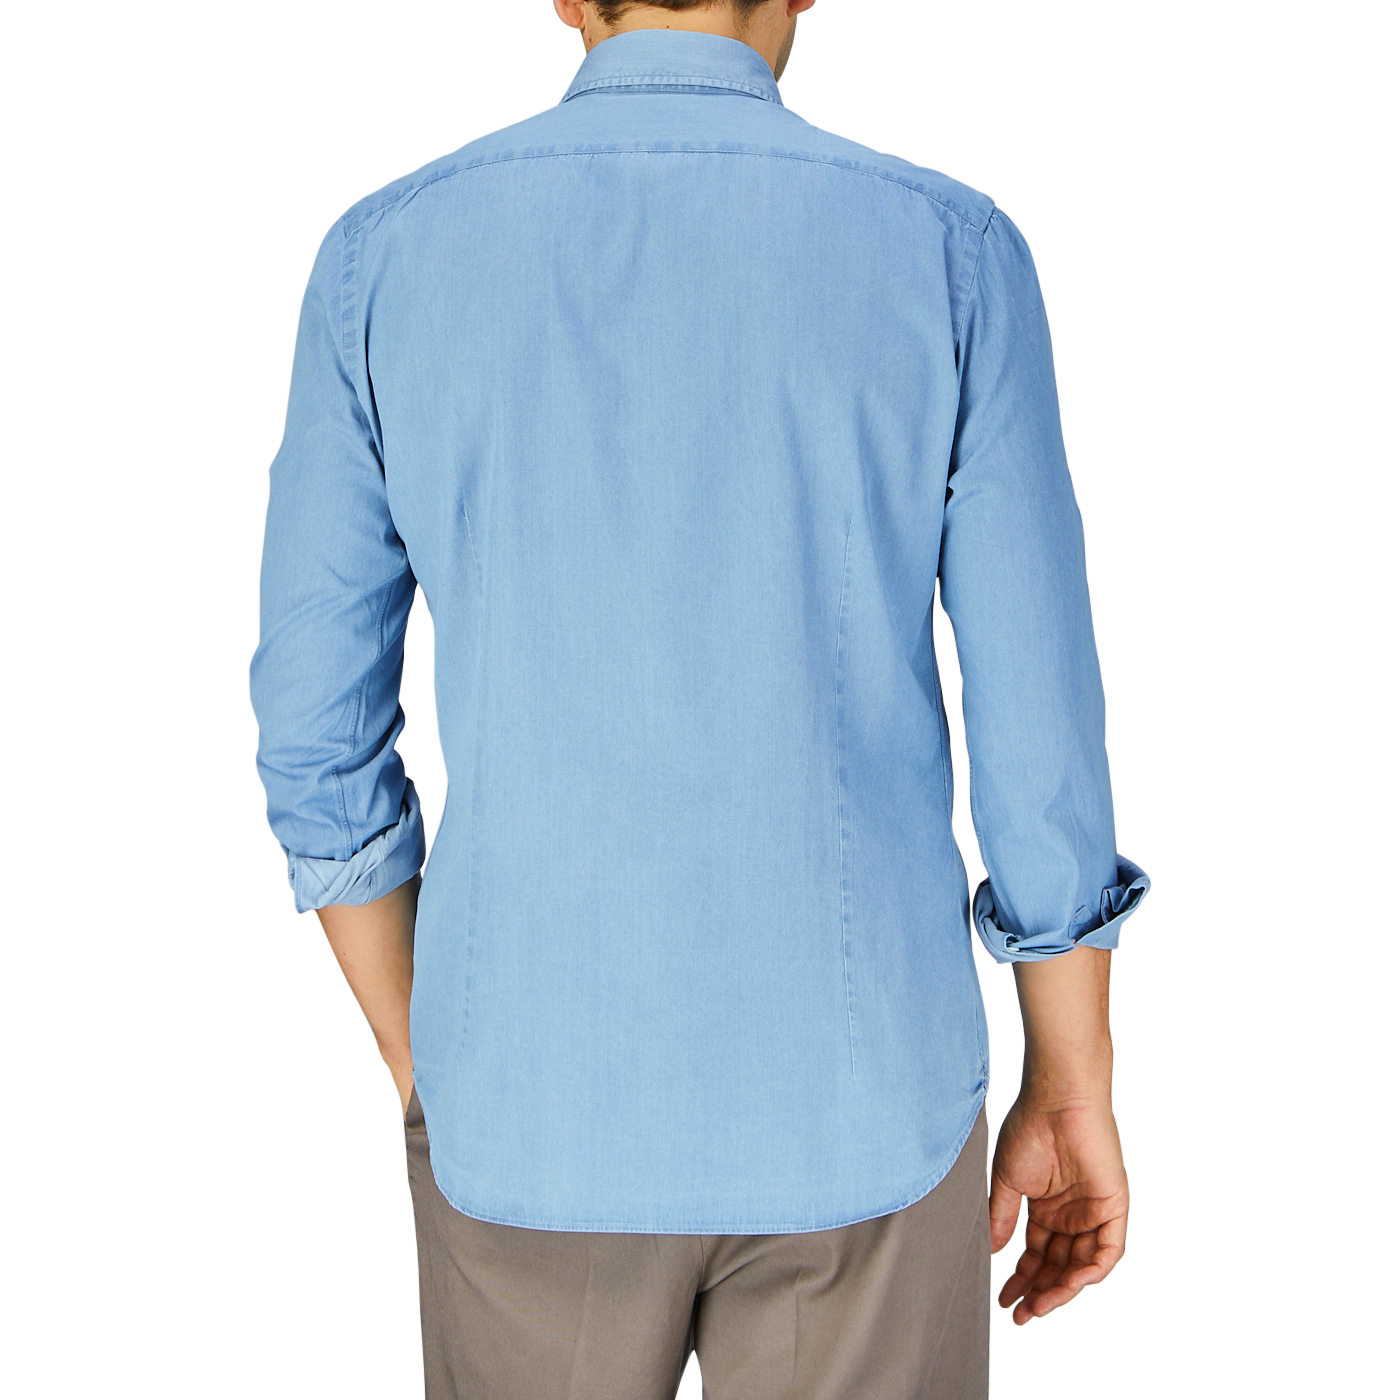 Man wearing a Mazzarelli Light Denim Washed Cotton BD Regular Fit Shirt viewed from the back.